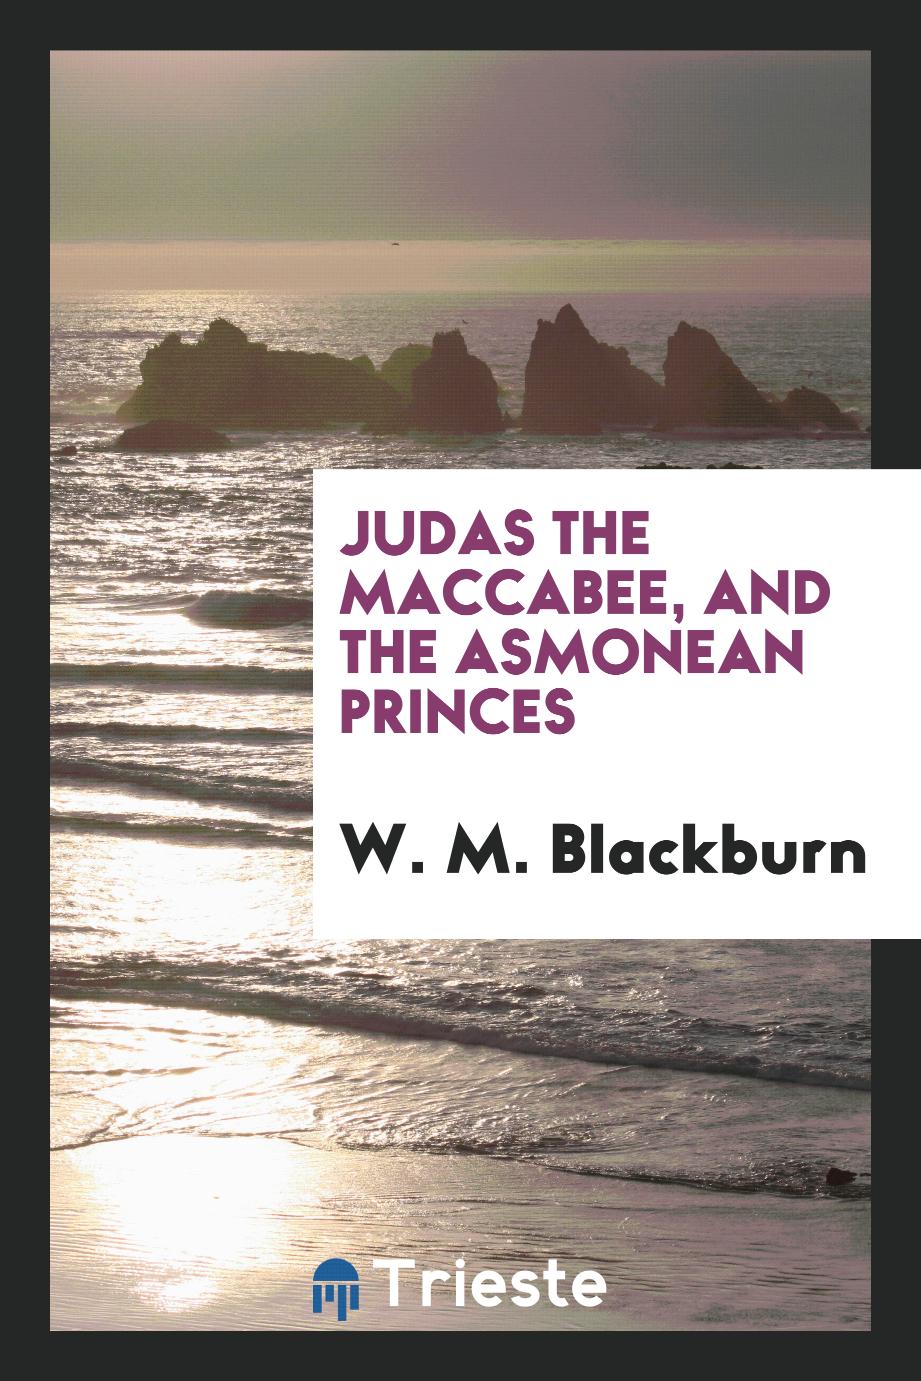 Judas the Maccabee, and the Asmonean princes